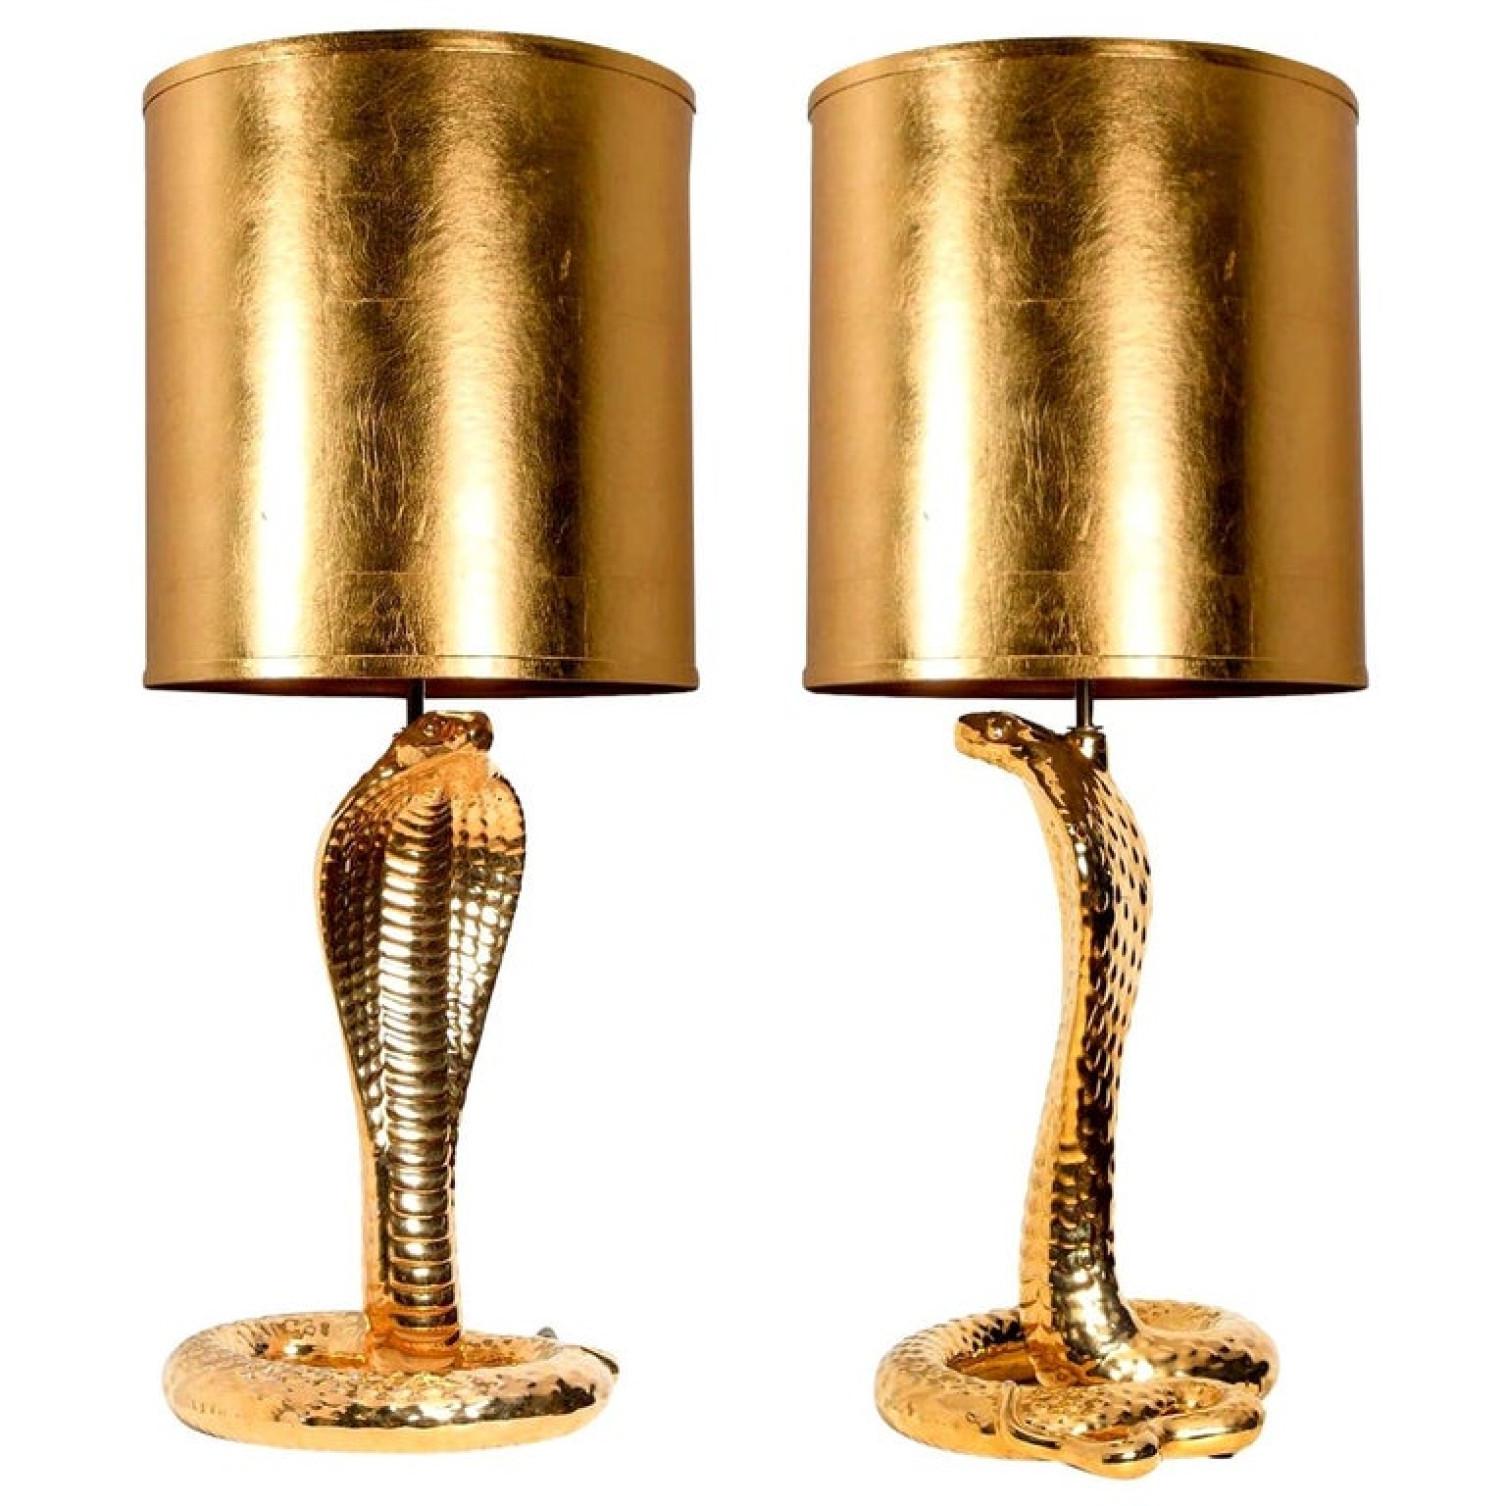 Pair of exceptional large table lamps. Unique gold-glazed ceramic table lamp in the shape of a cobra. A fine work signed by Tommaso Barbi, 1970 period. In absolutely perfect condition. With exceptional new custom made shades by René Houben. With